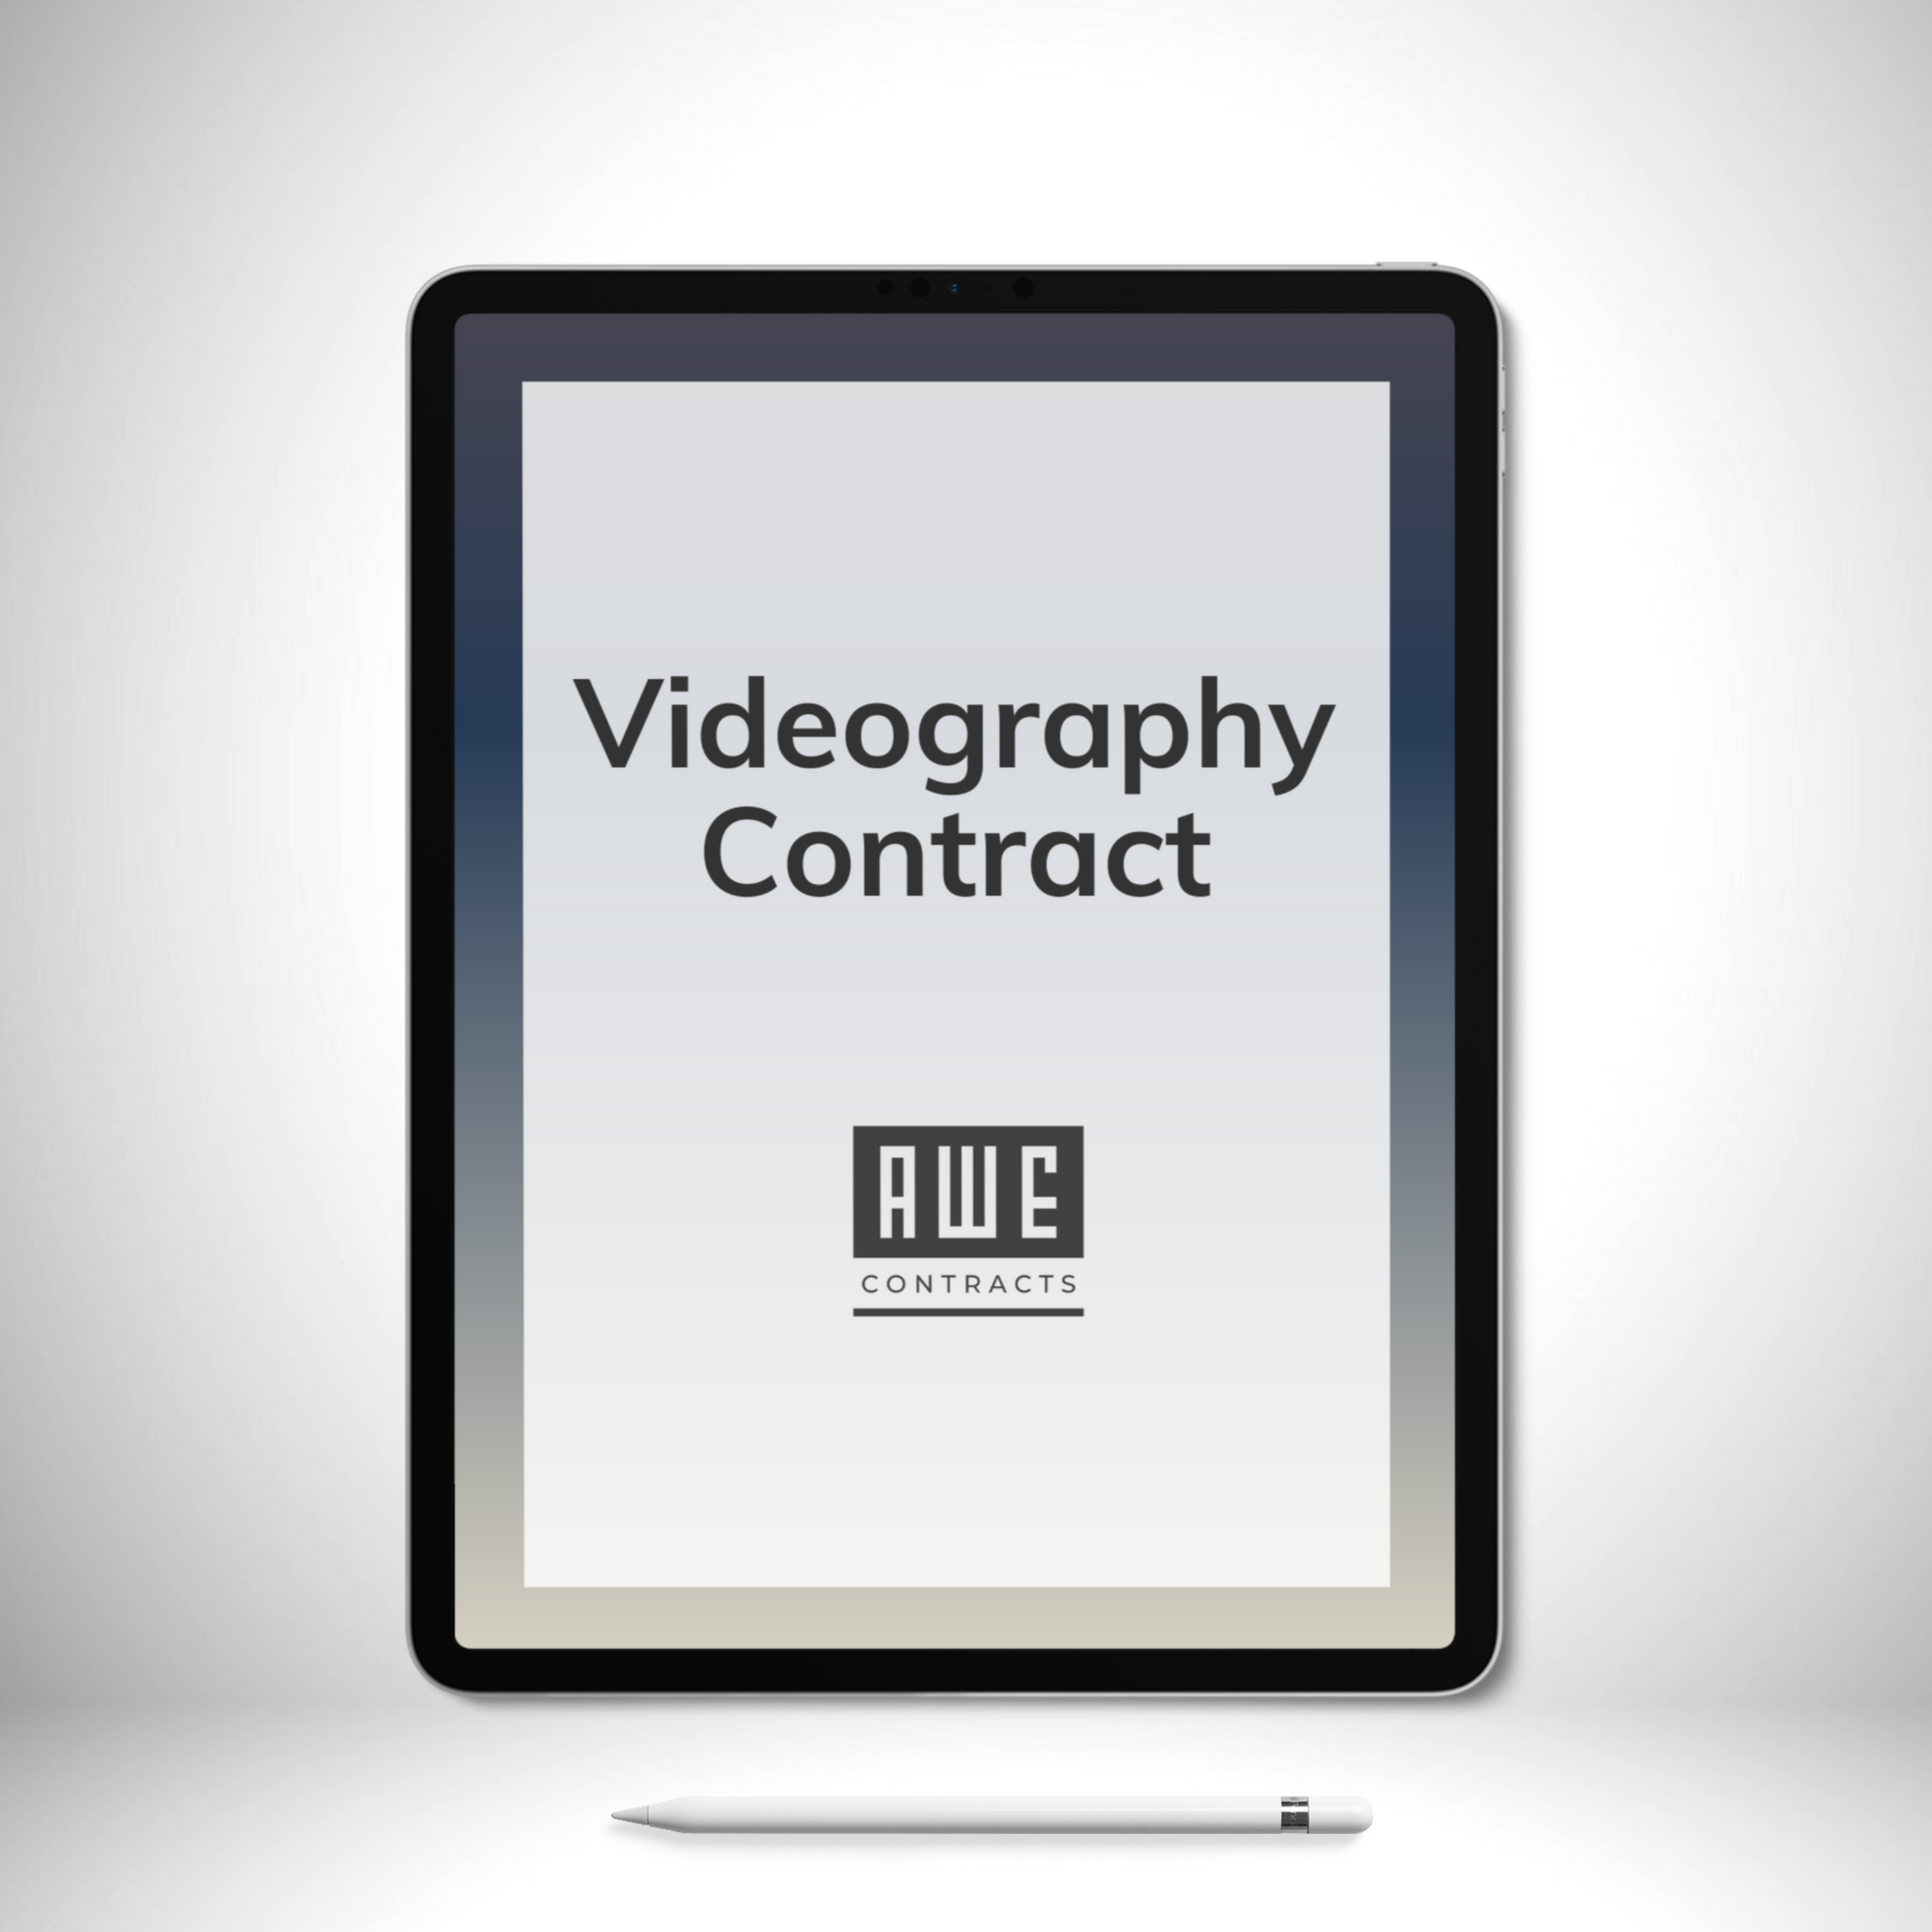 Videography Contract